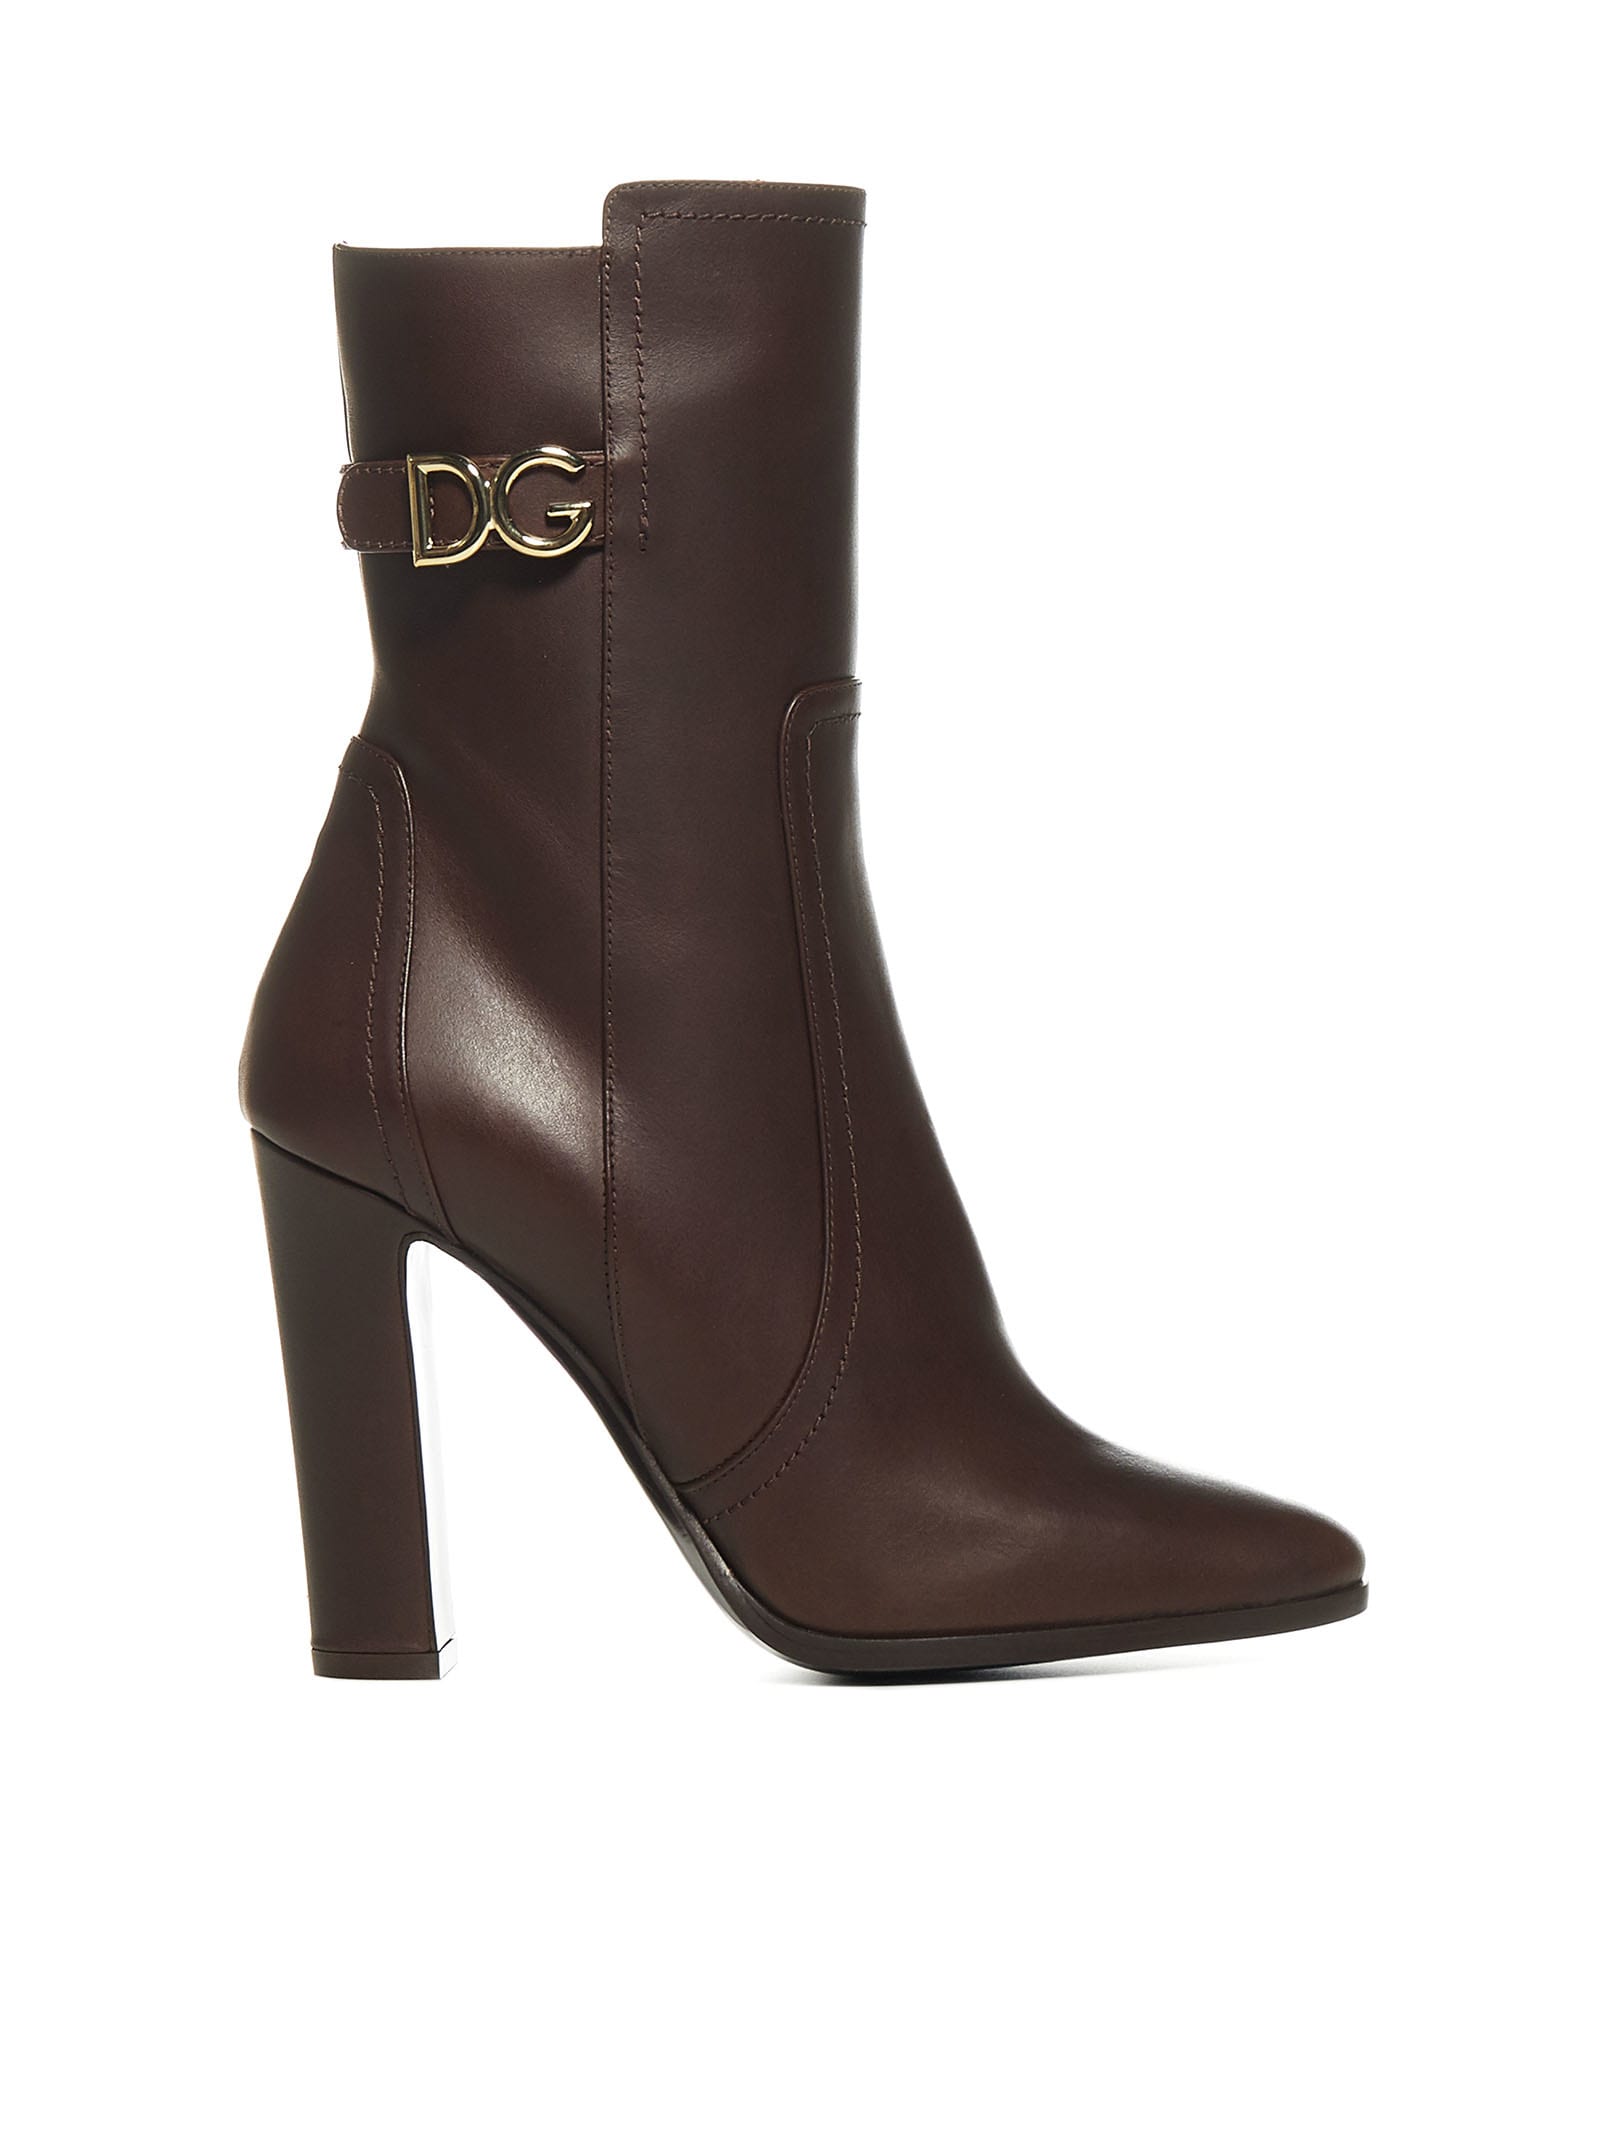 DOLCE & GABBANA LOGO LEATHER ANKLE BOOTS,CT0669 AW67380048